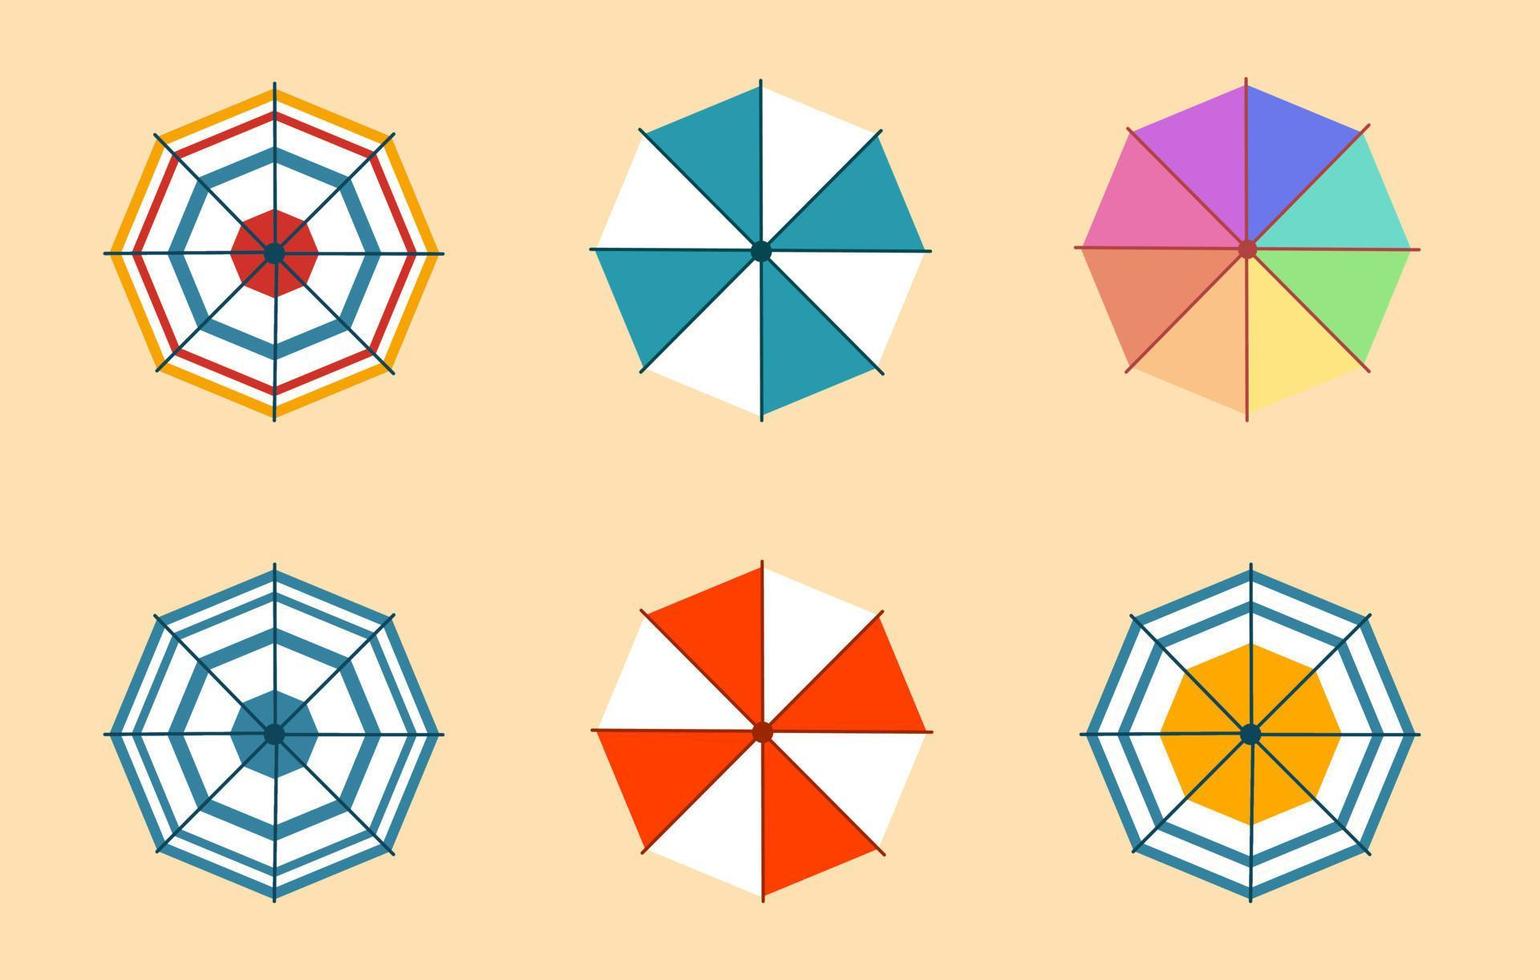 Umbrellas for the beach. View from above. Vector illustration in a flat style